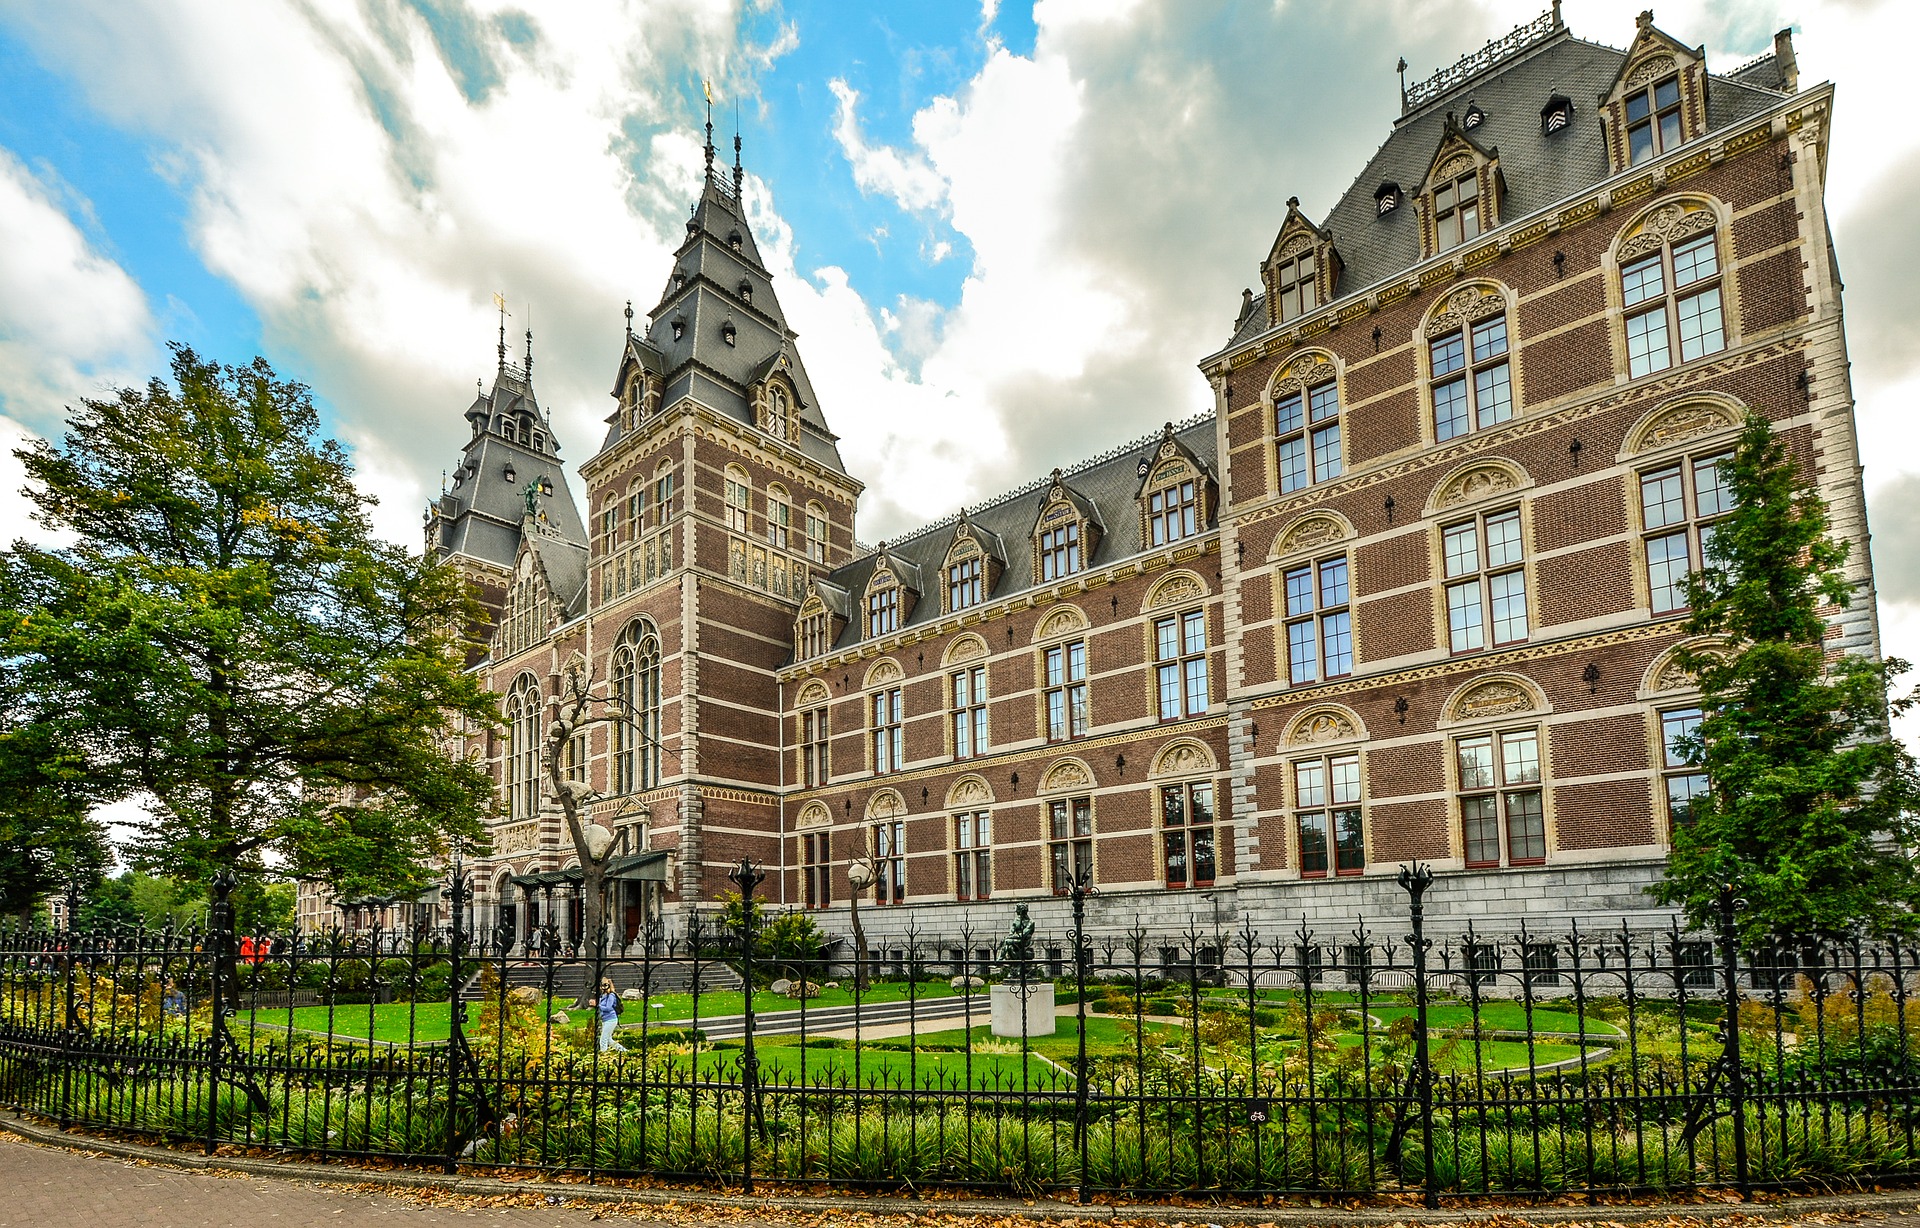 The Rijksmuseum, whose director broadly supports the proposals